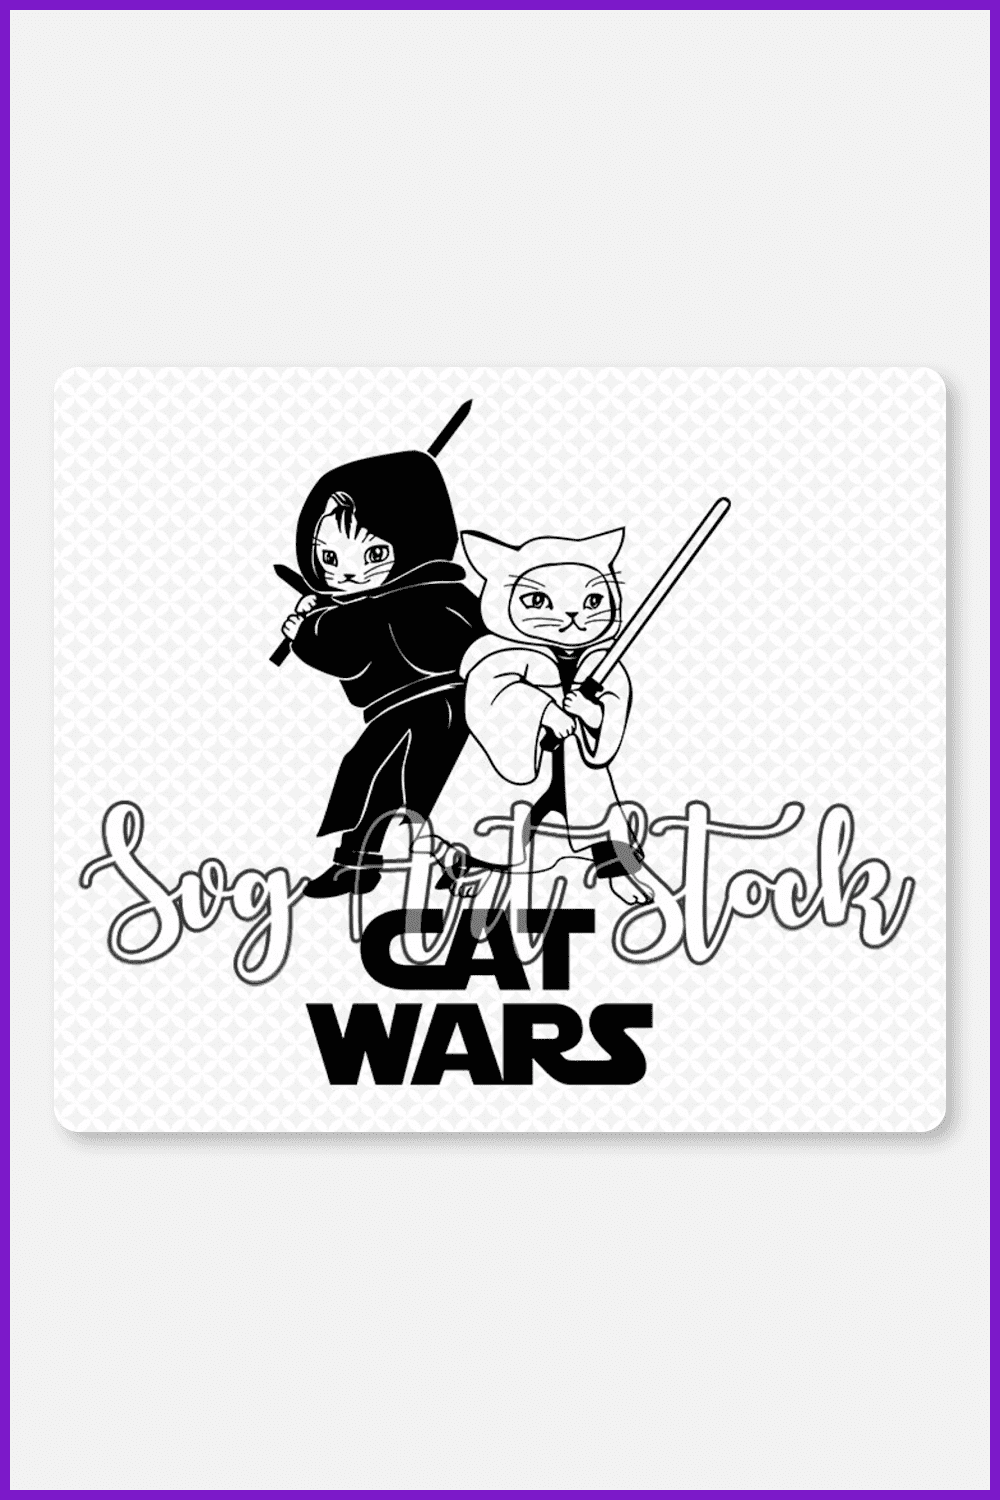 Cats in the form of Jedi in black and white robes.